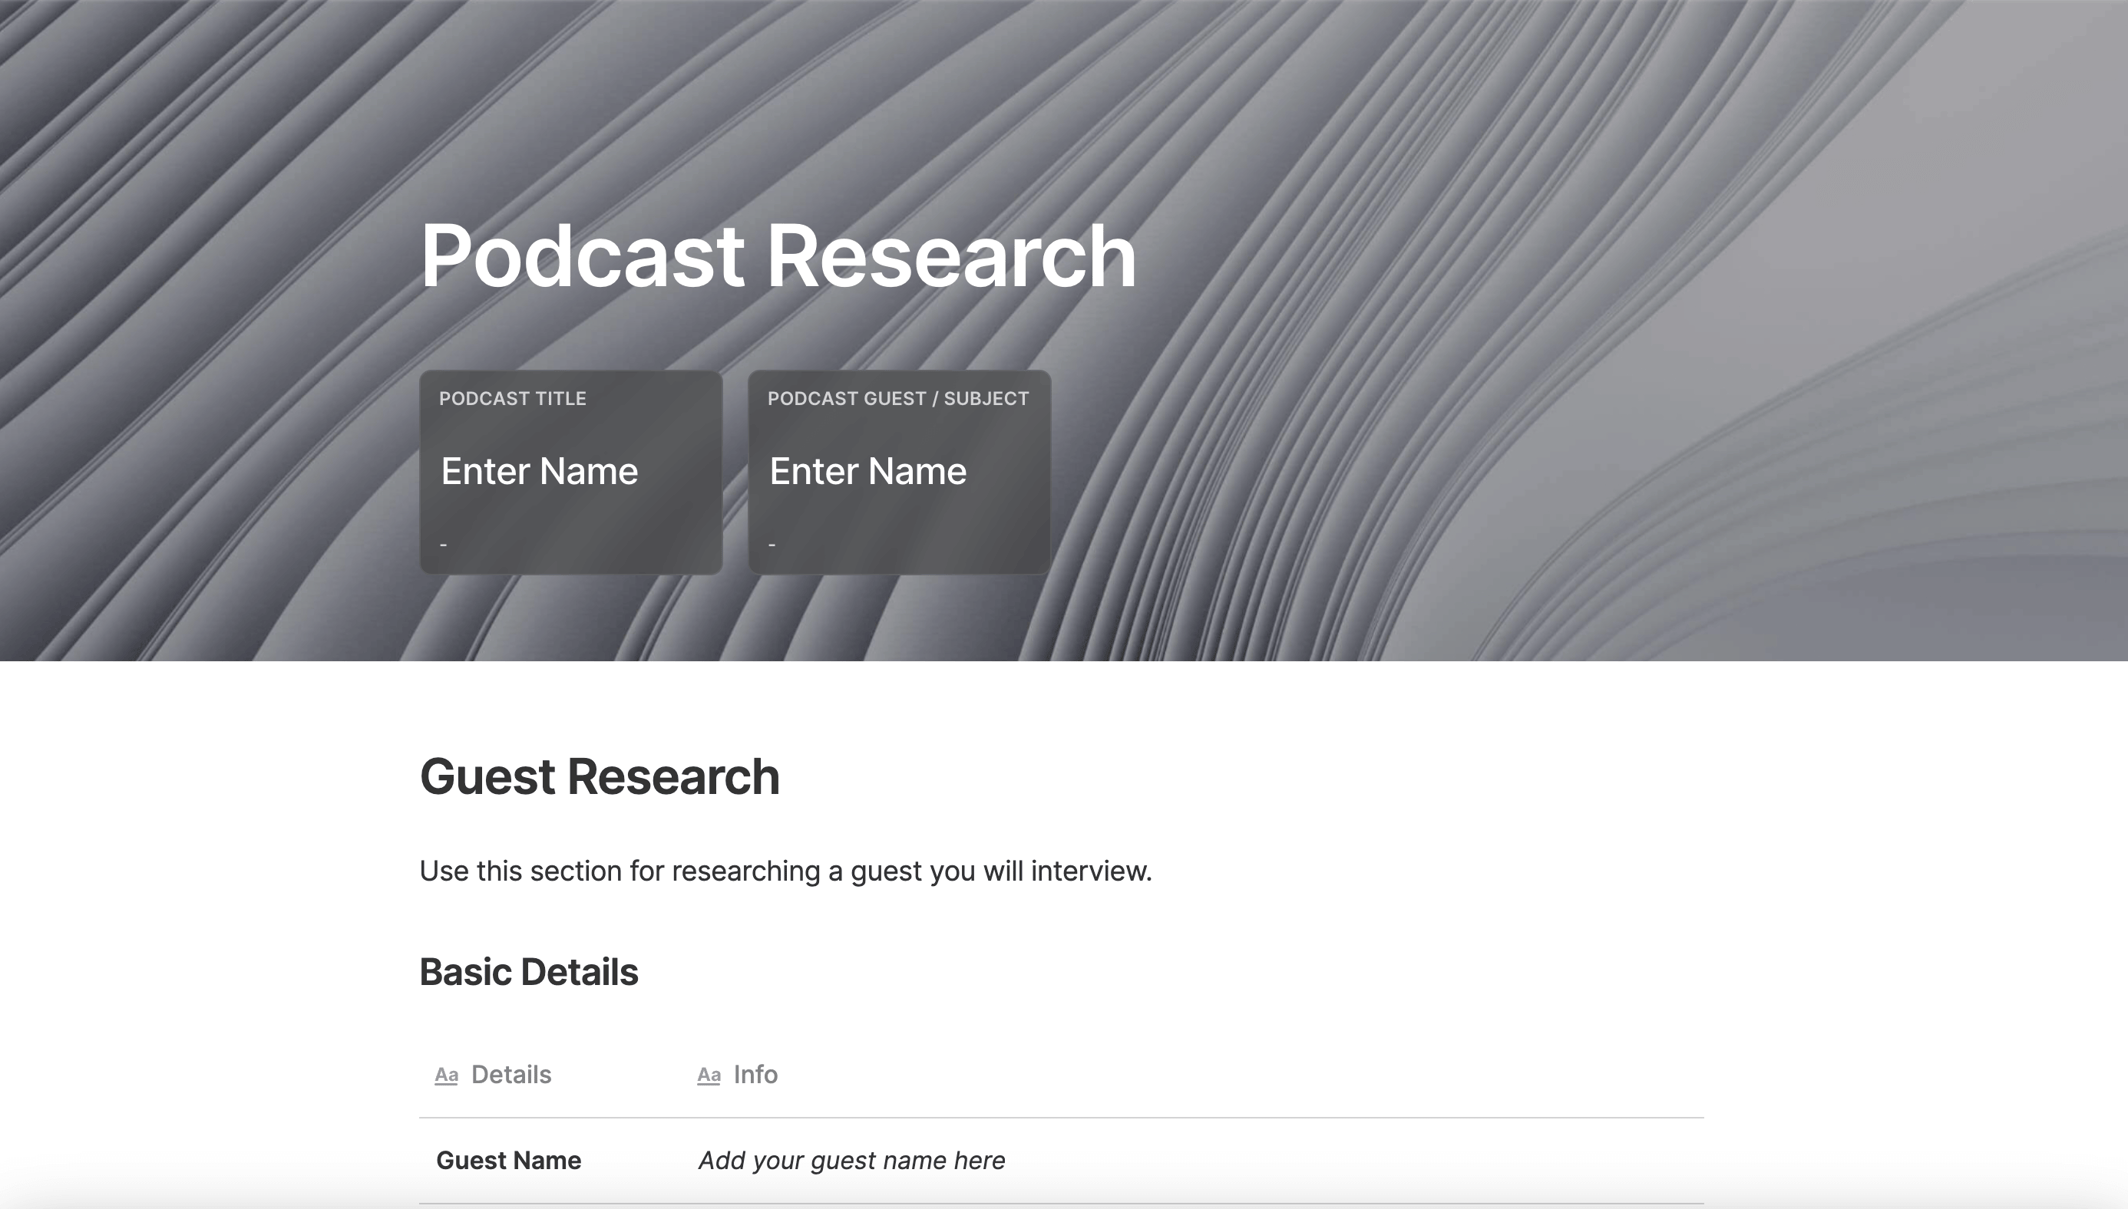 https://3389140.fs1.hubspotusercontent-na1.net/hubfs/3389140/podcast%20research%20template%20cover.png